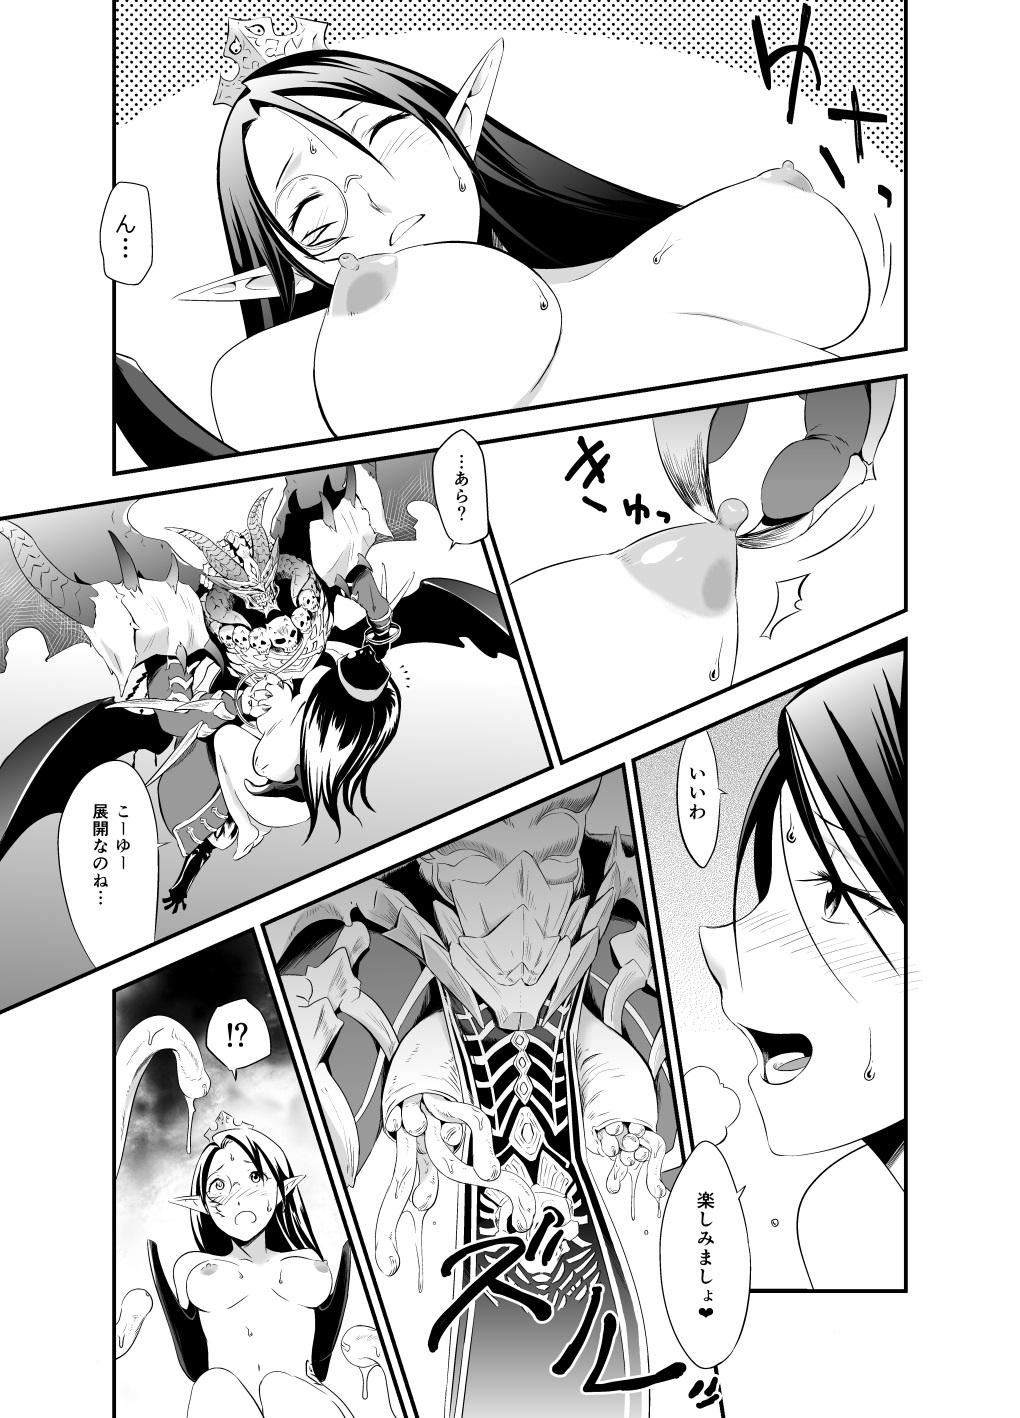 Casting 3rd Ride - Cardfight vanguard Squirt - Page 9